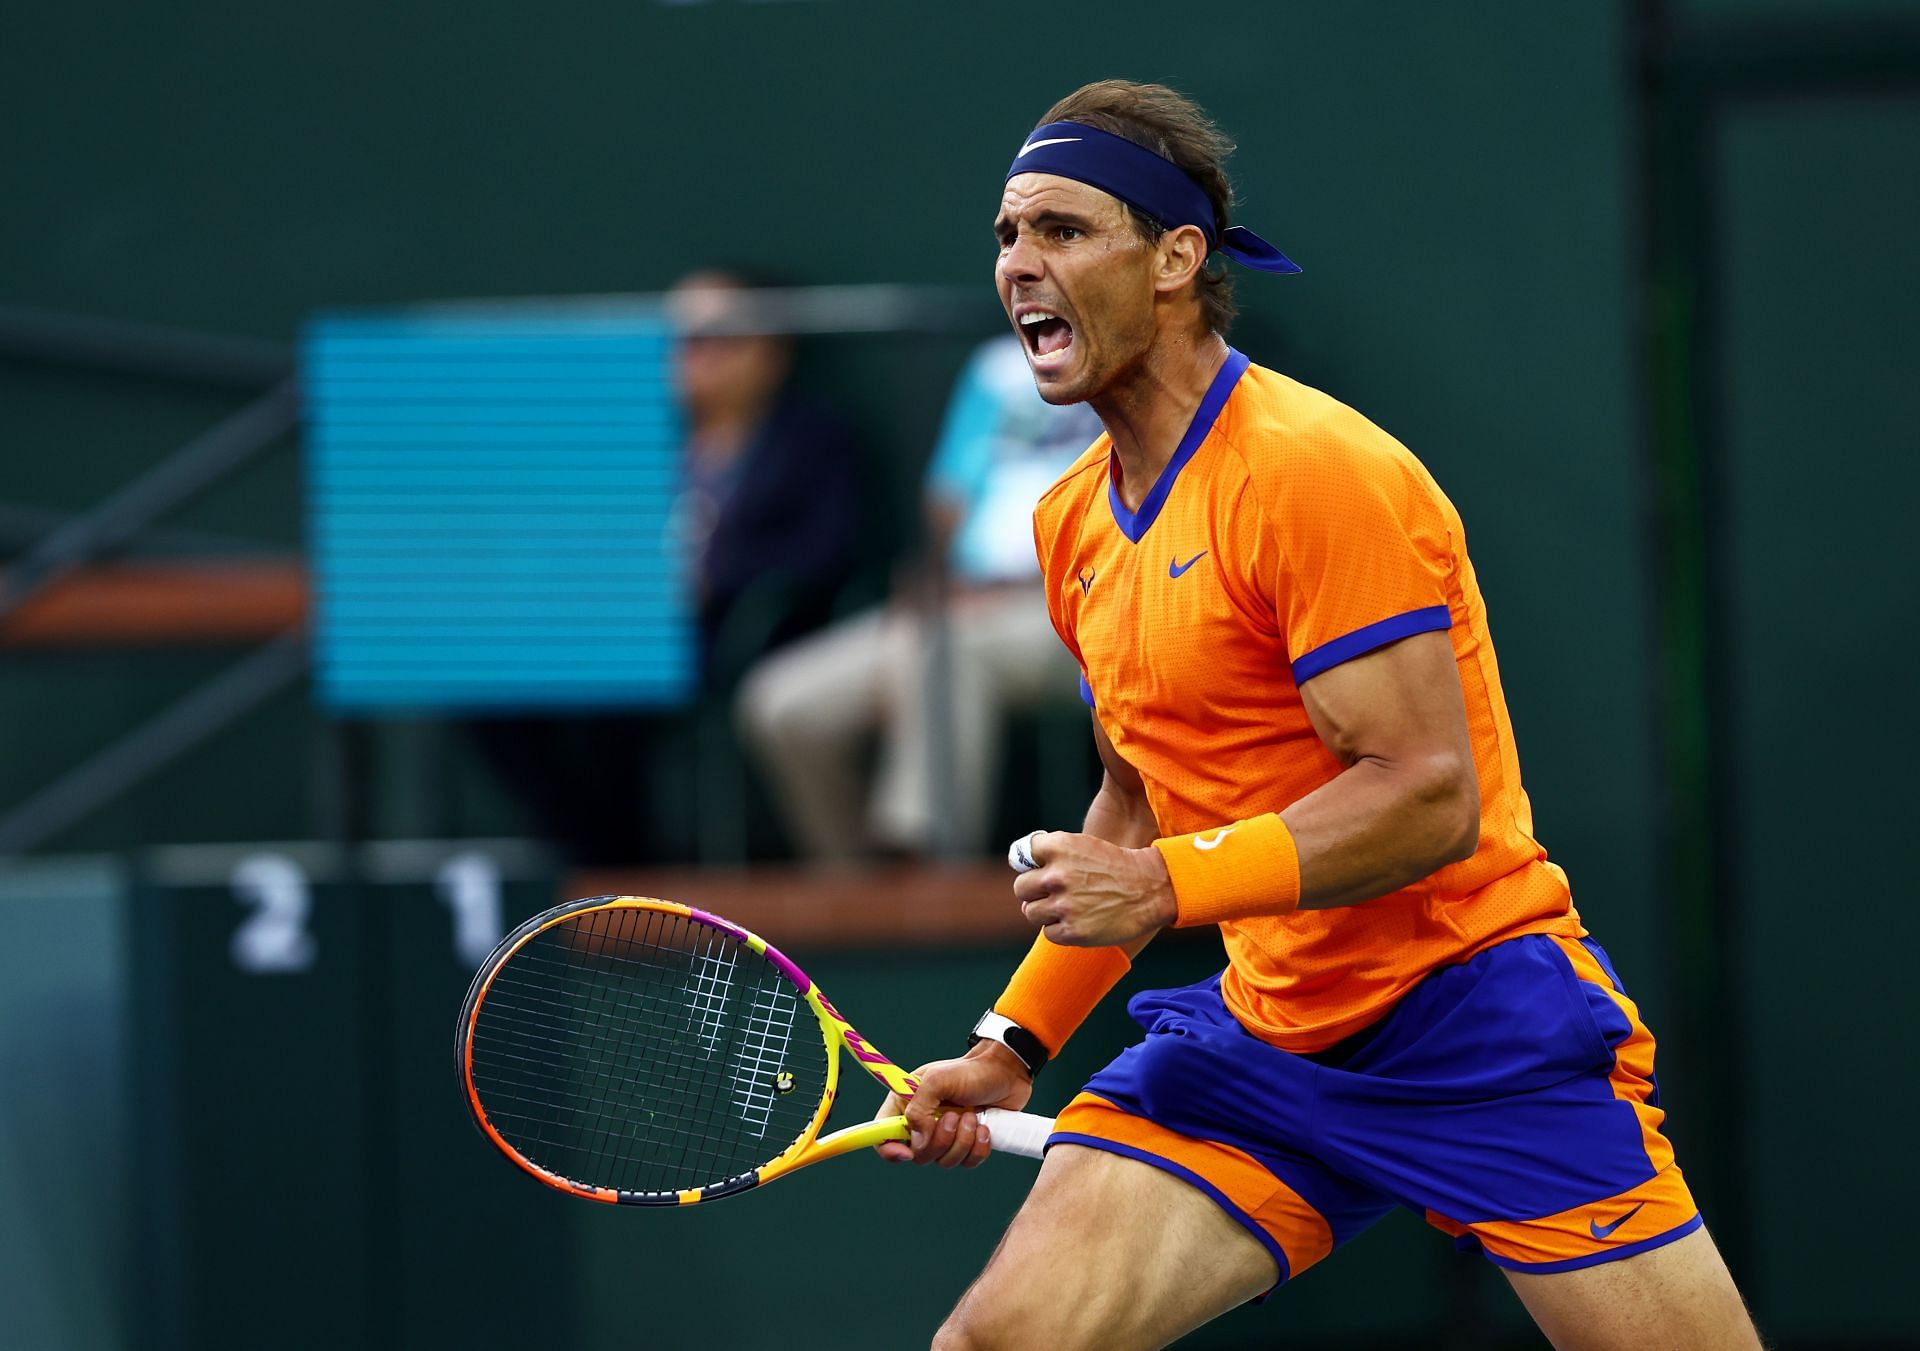 Rafael Nadal takes on Taylor Fritz in the final of the 2022 Indian Wells Masters